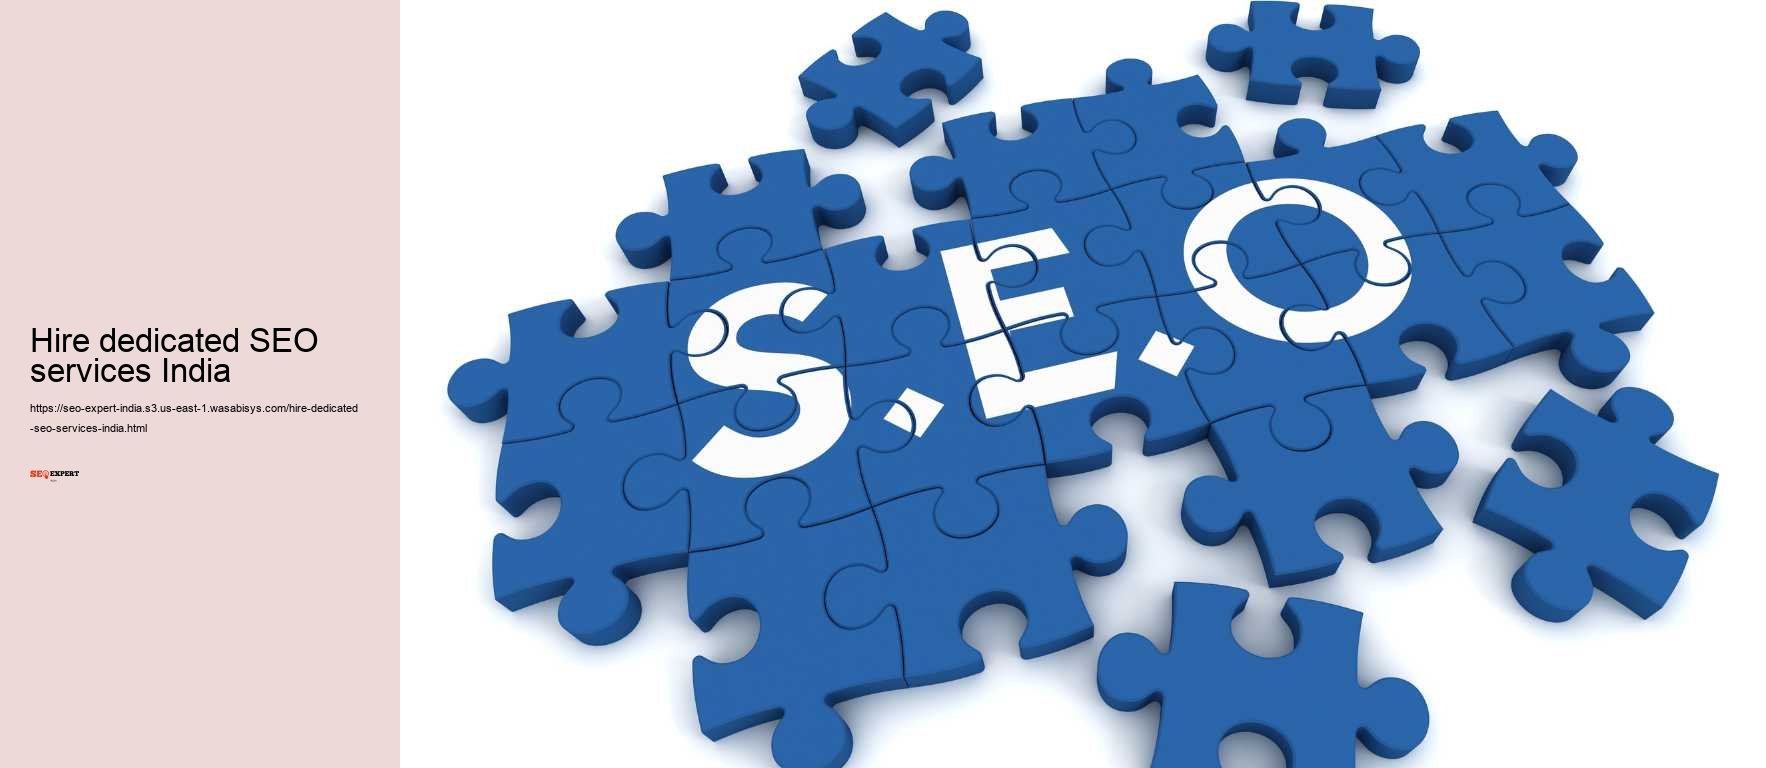 Hire dedicated SEO services India